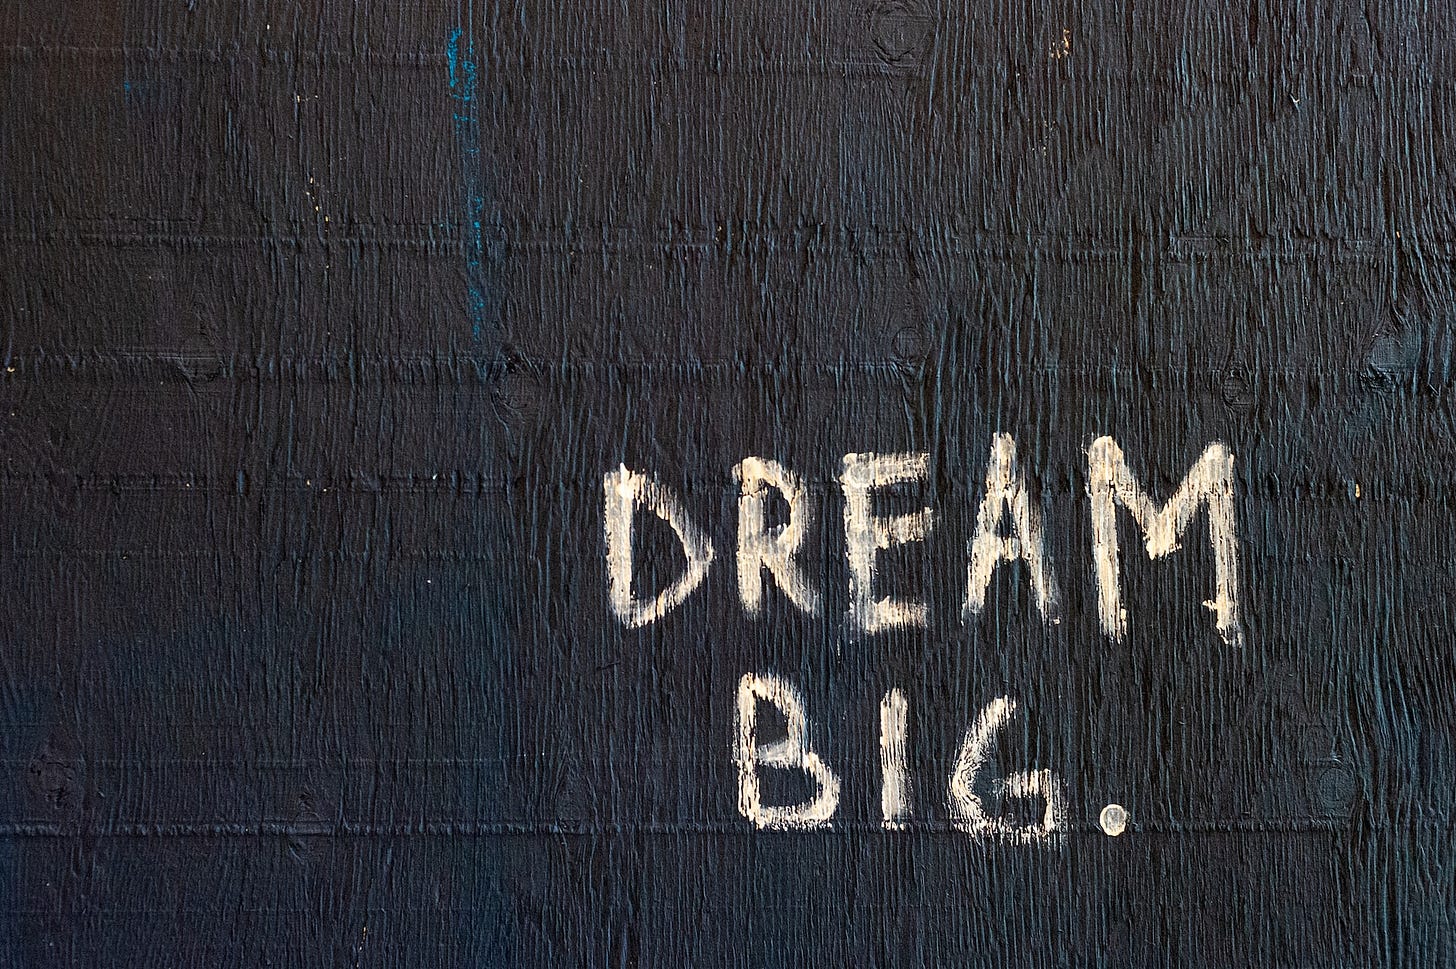 Dream Big, with or without embeddings